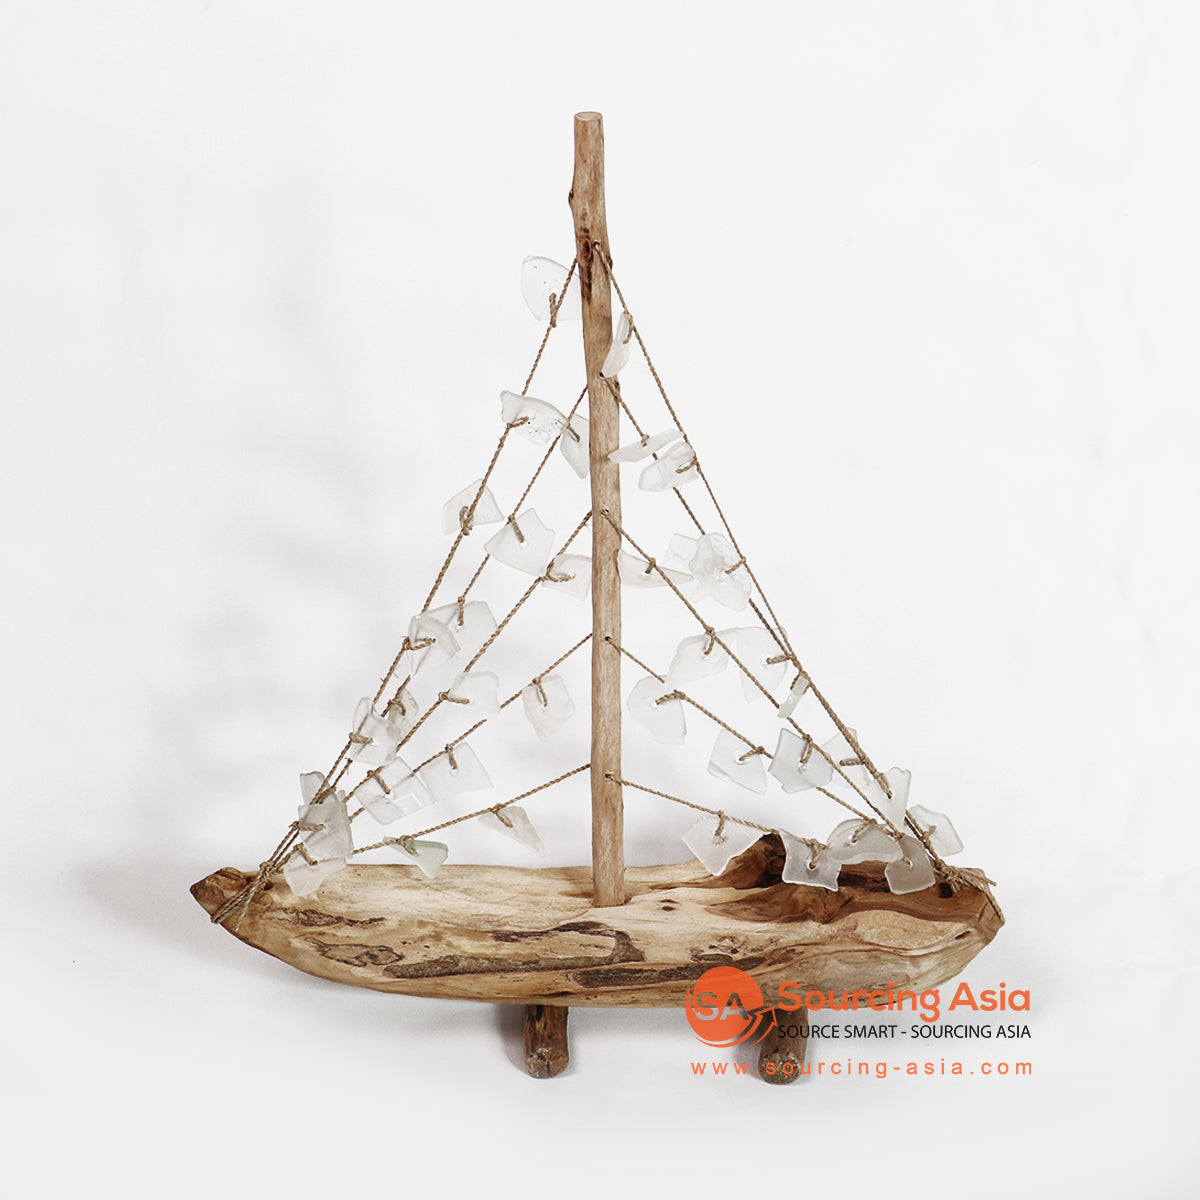 VJ019 DRIFTWOOD AND GLASS BOAT DECORATION - Sourcing Asia